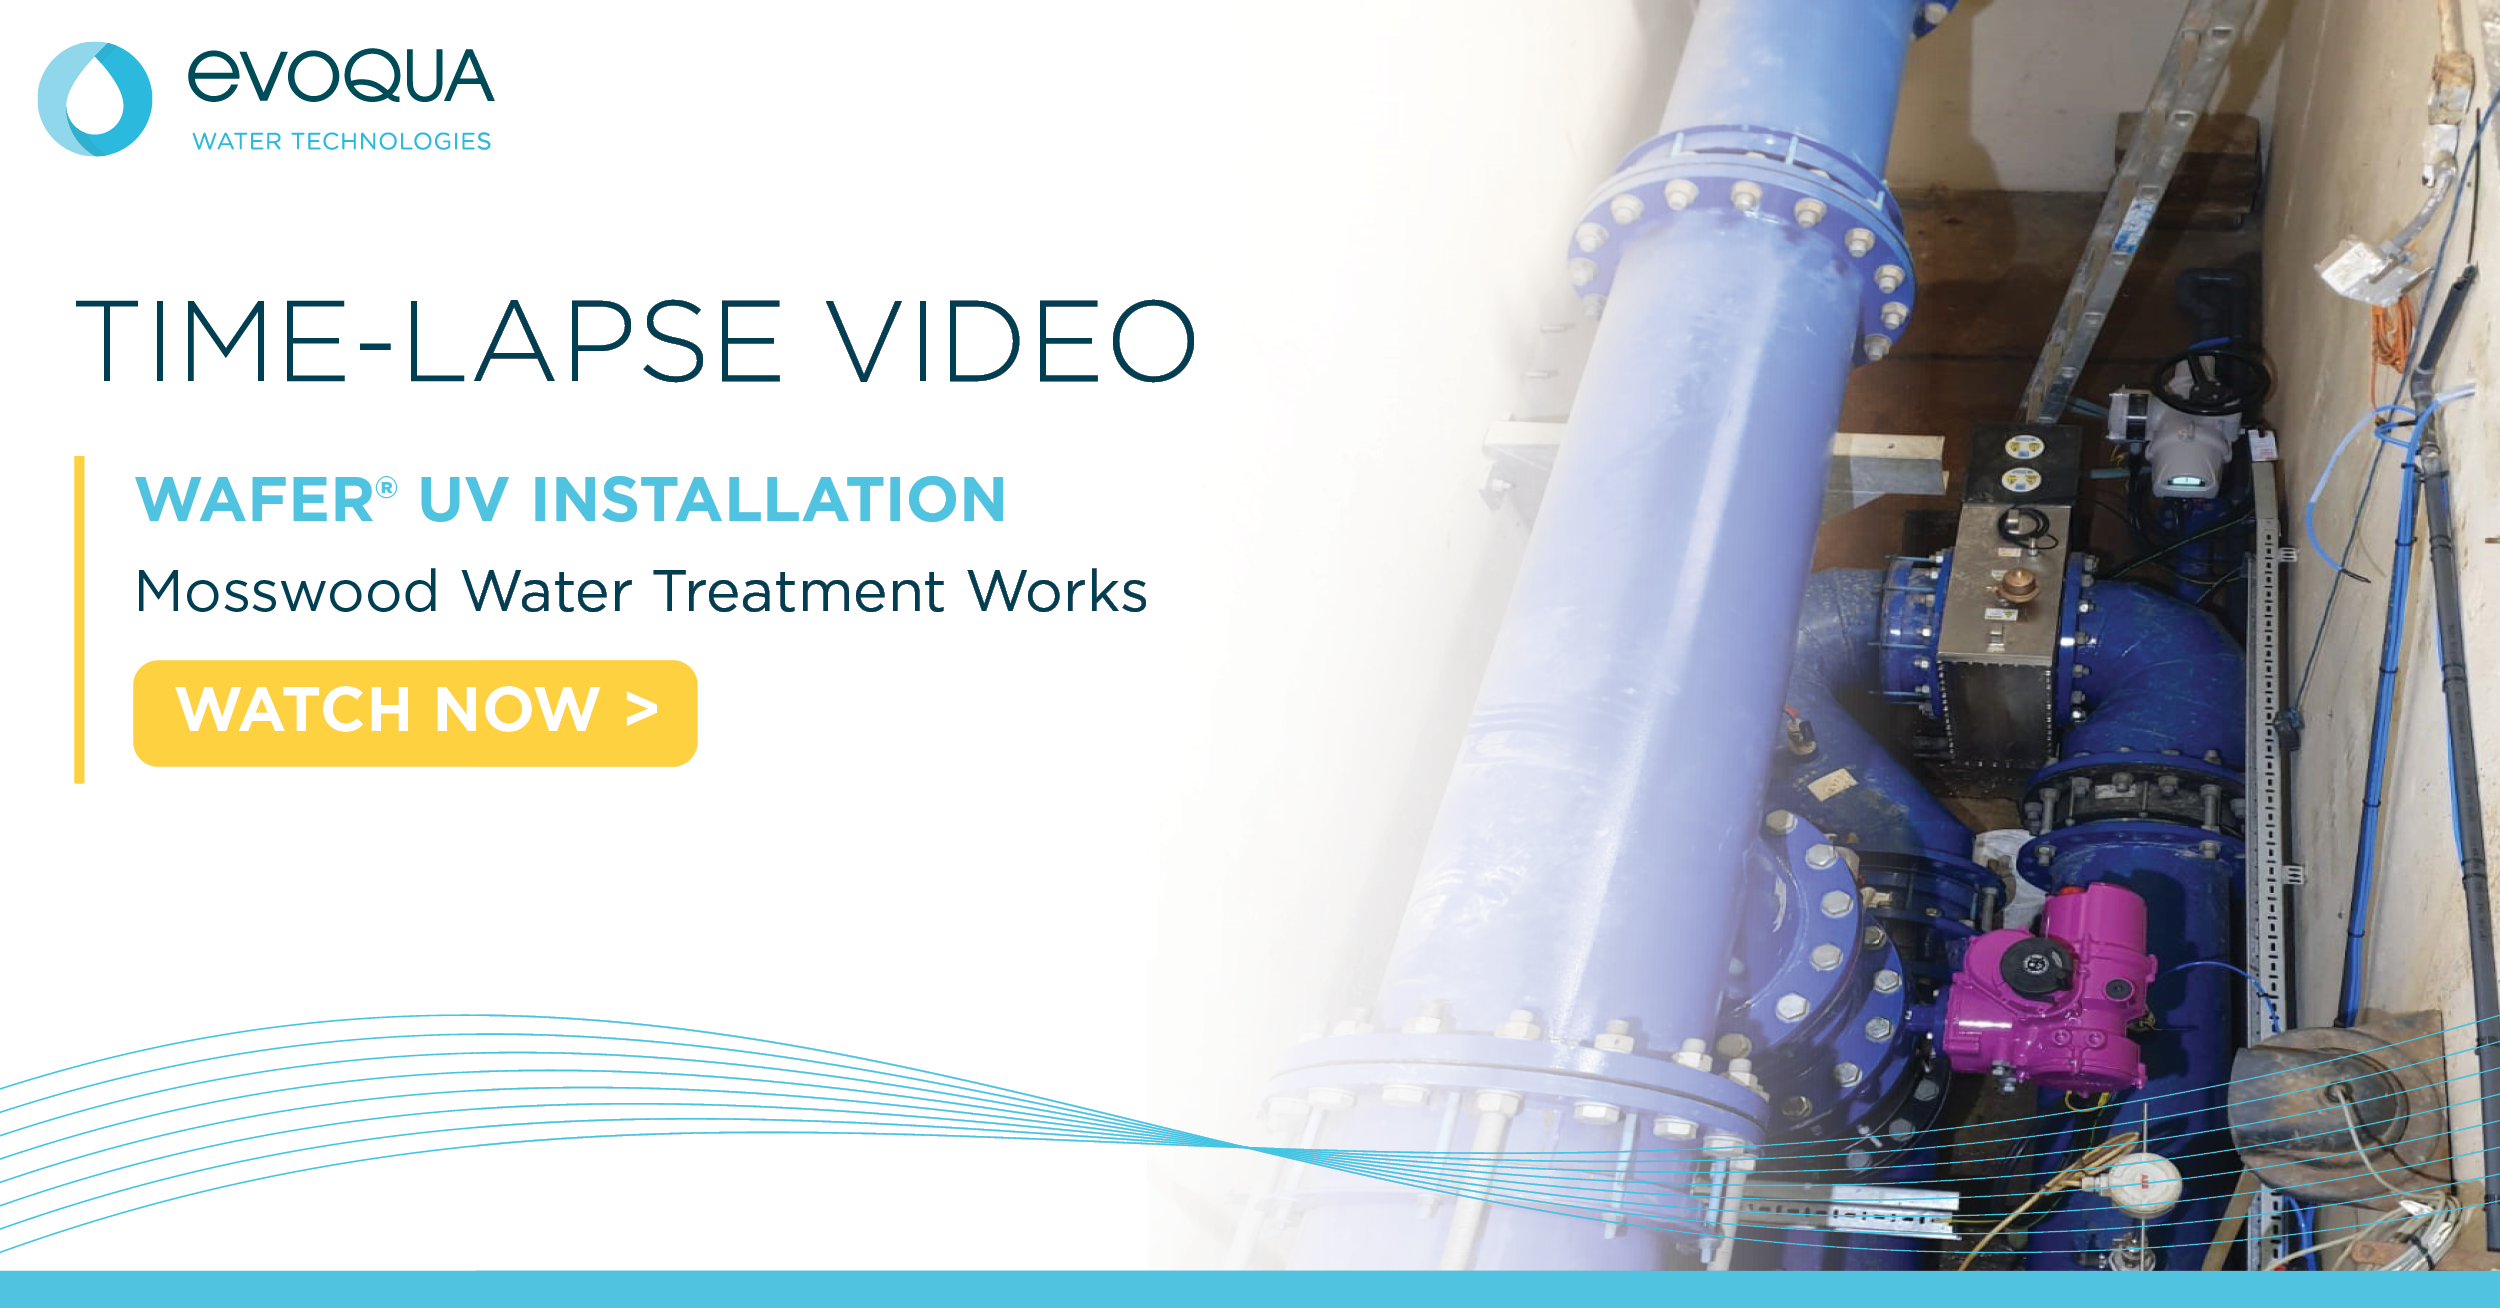 Wafer® UV Installation Time-Lapse: Mosswood WTW